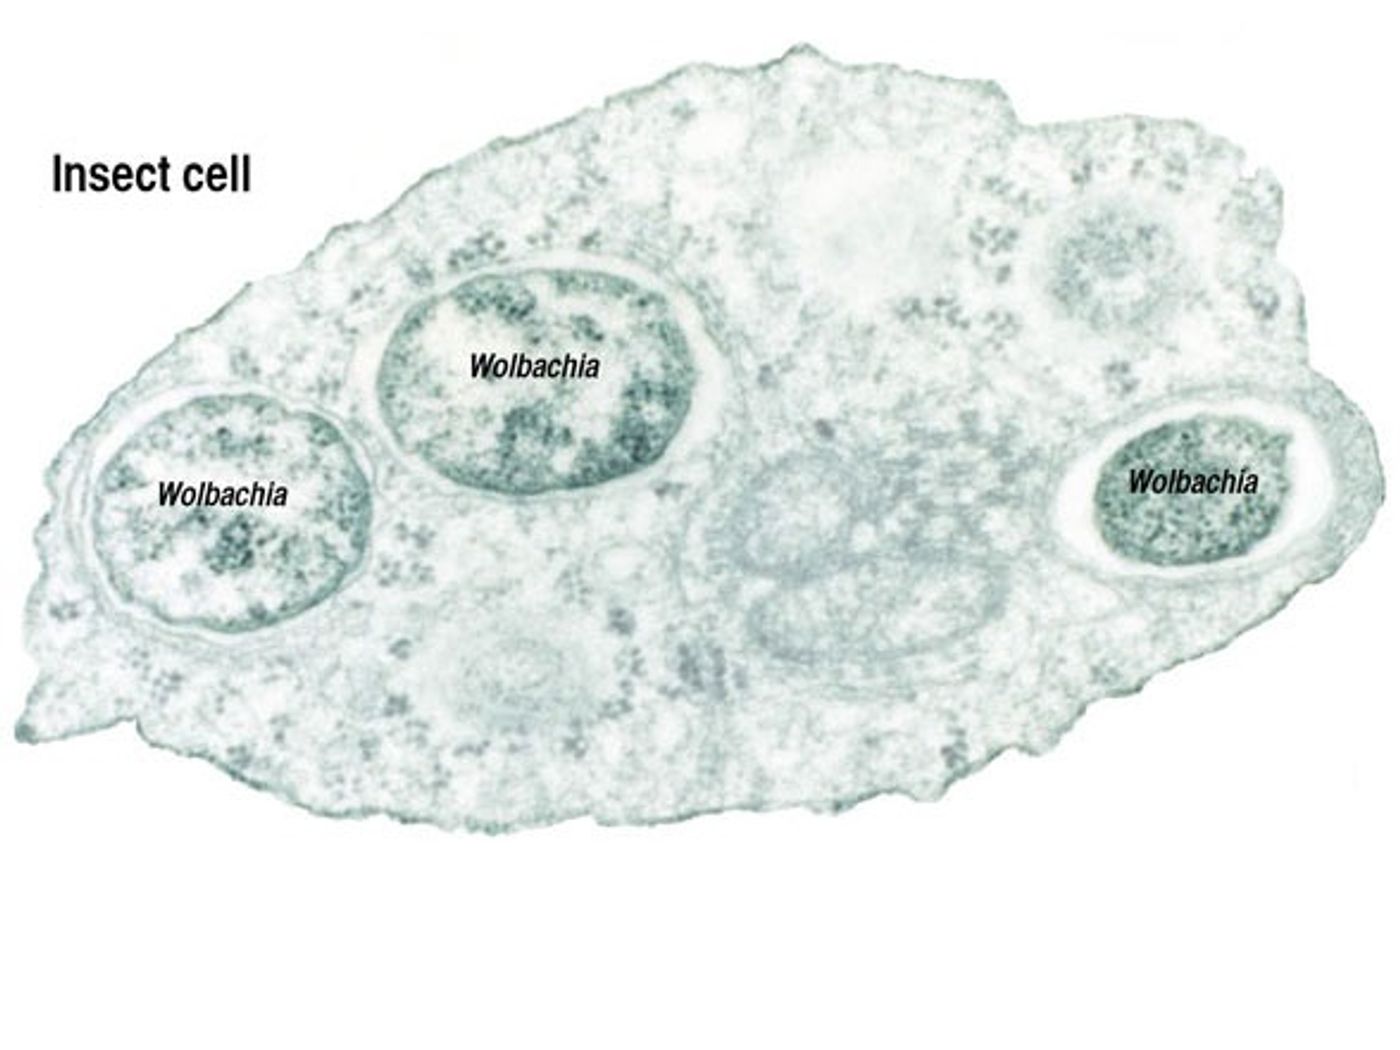 Wolbachia are intracellular parasites.